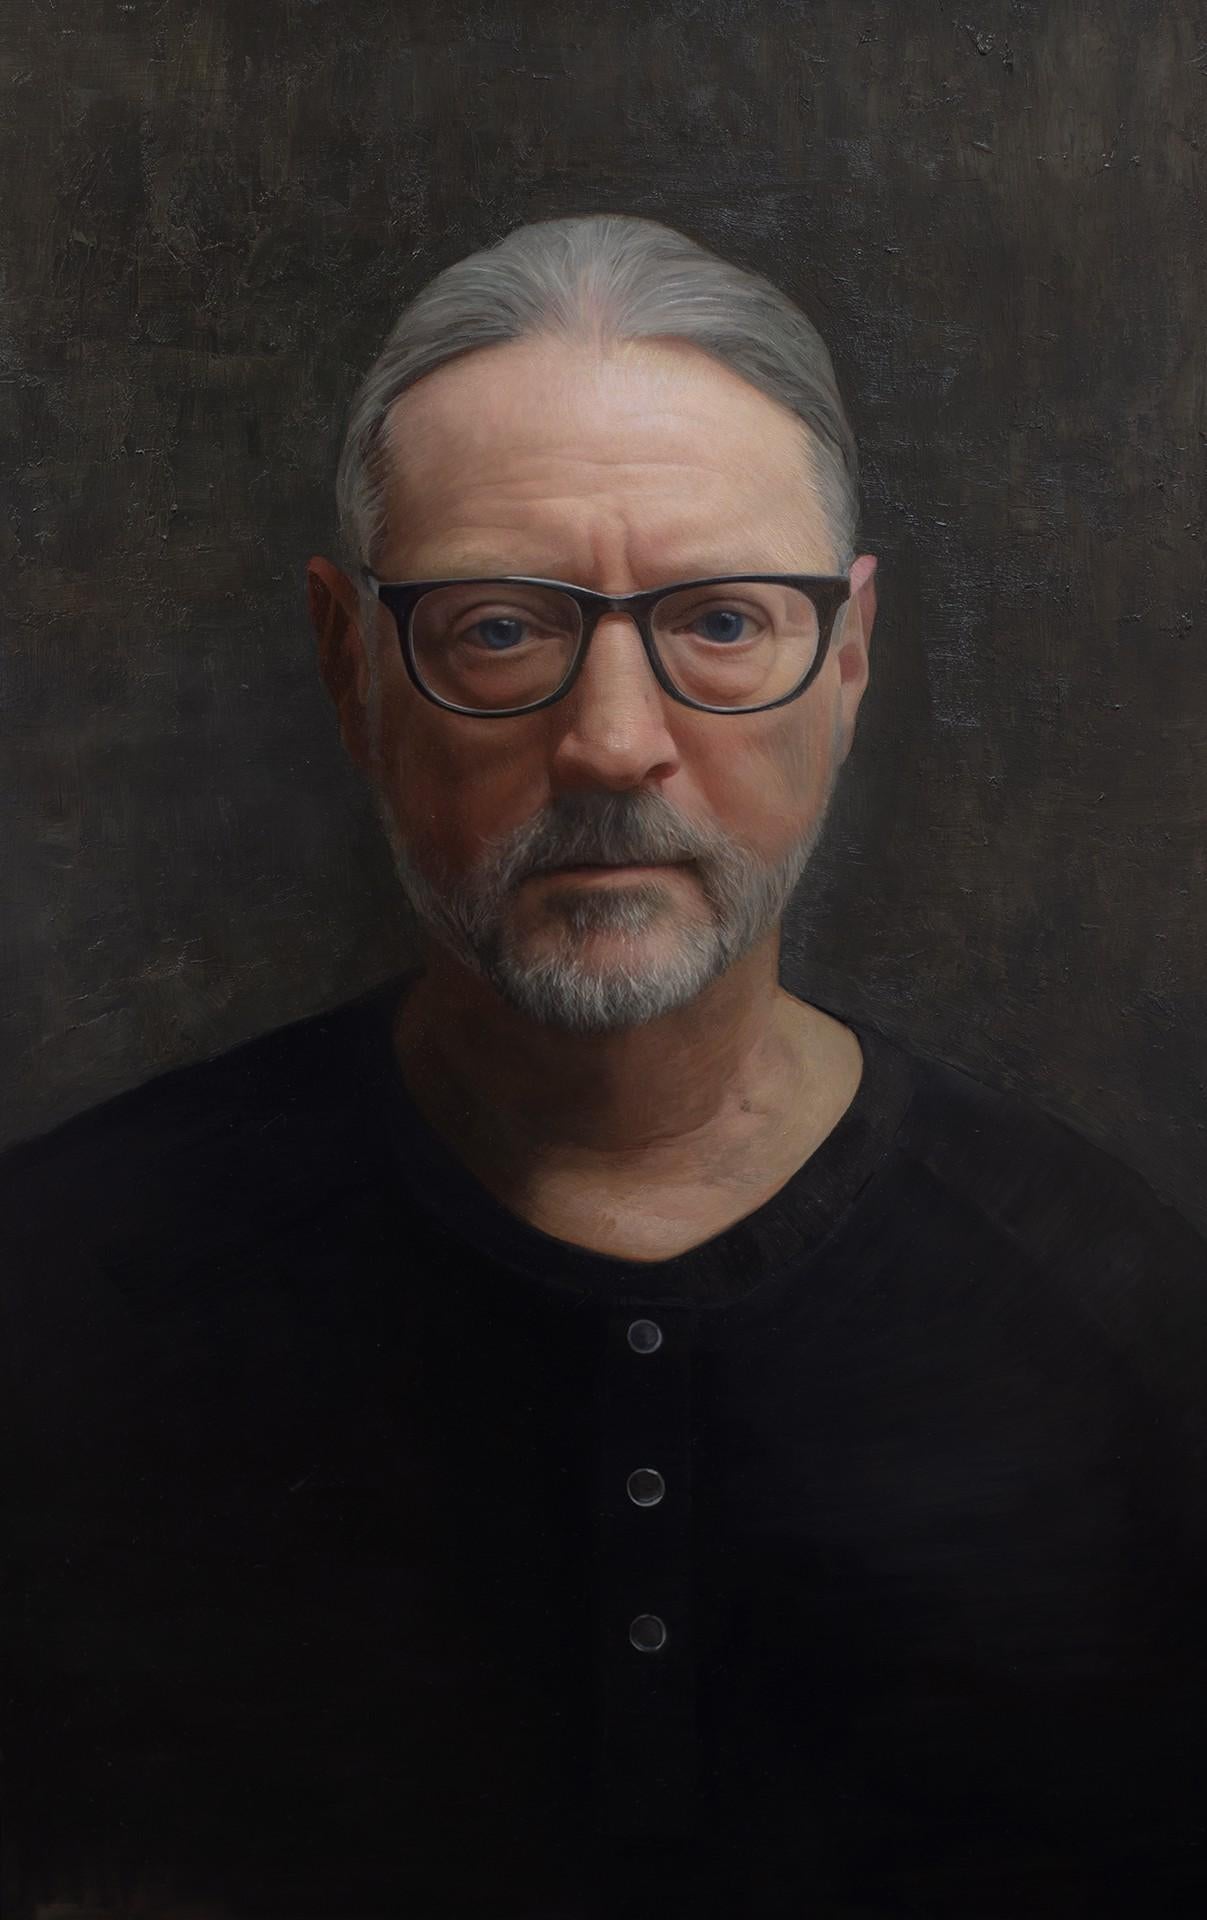 David Kassan’s "Self Portrait at 72" (2021) is an introspective exploration into the future, where the artist imagines himself as an elder. Painted in oil on acrylic mirror and measuring 23 x 14 inches within a frame of 24.37 x 15.37 inches, this